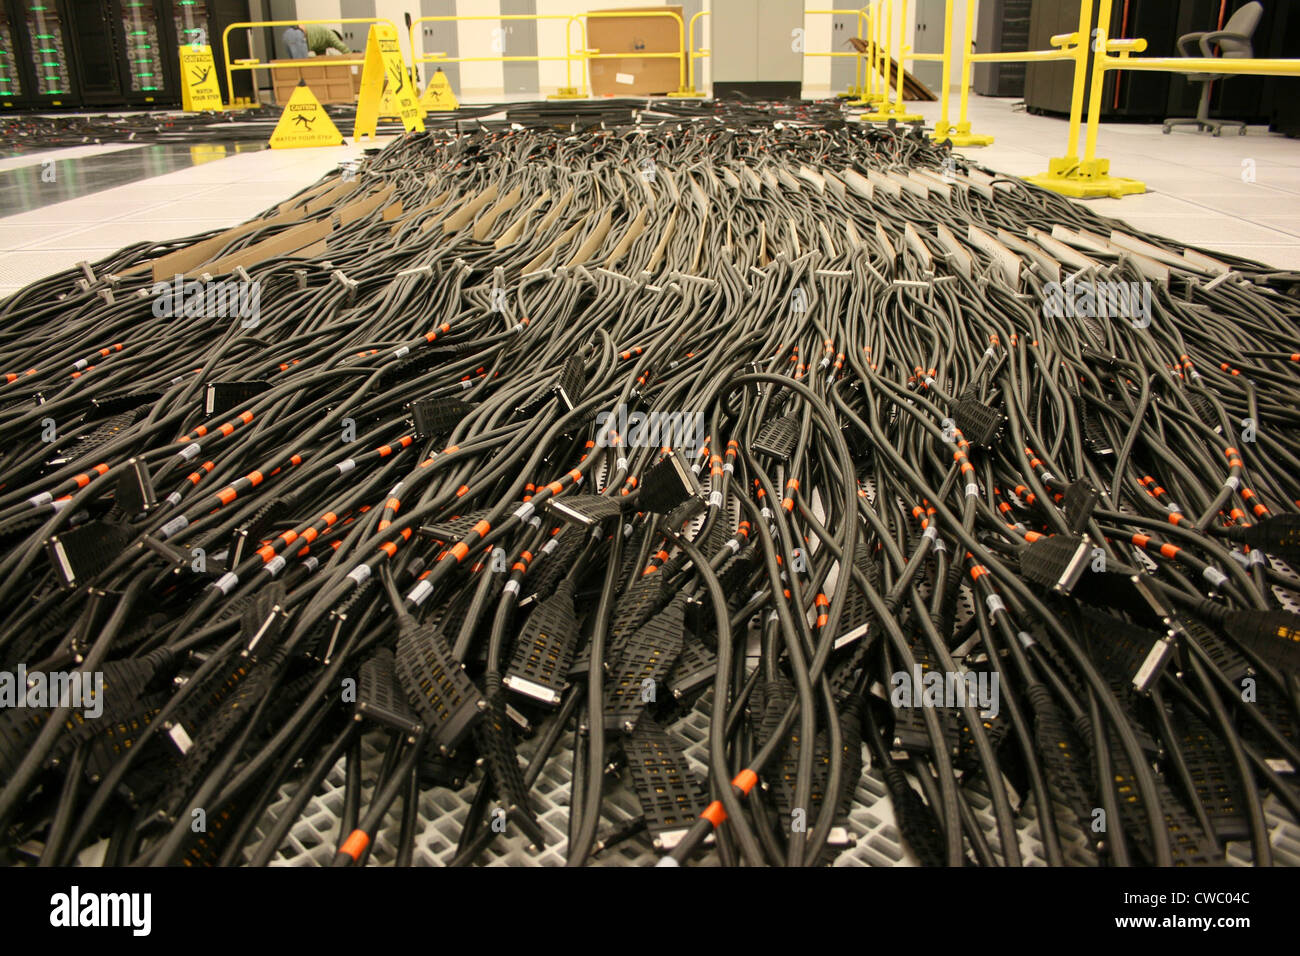 Rivers of cables for the Dawn supercomputer at the at Lawrence Livermore National Laboratory. 2009. Stock Photo